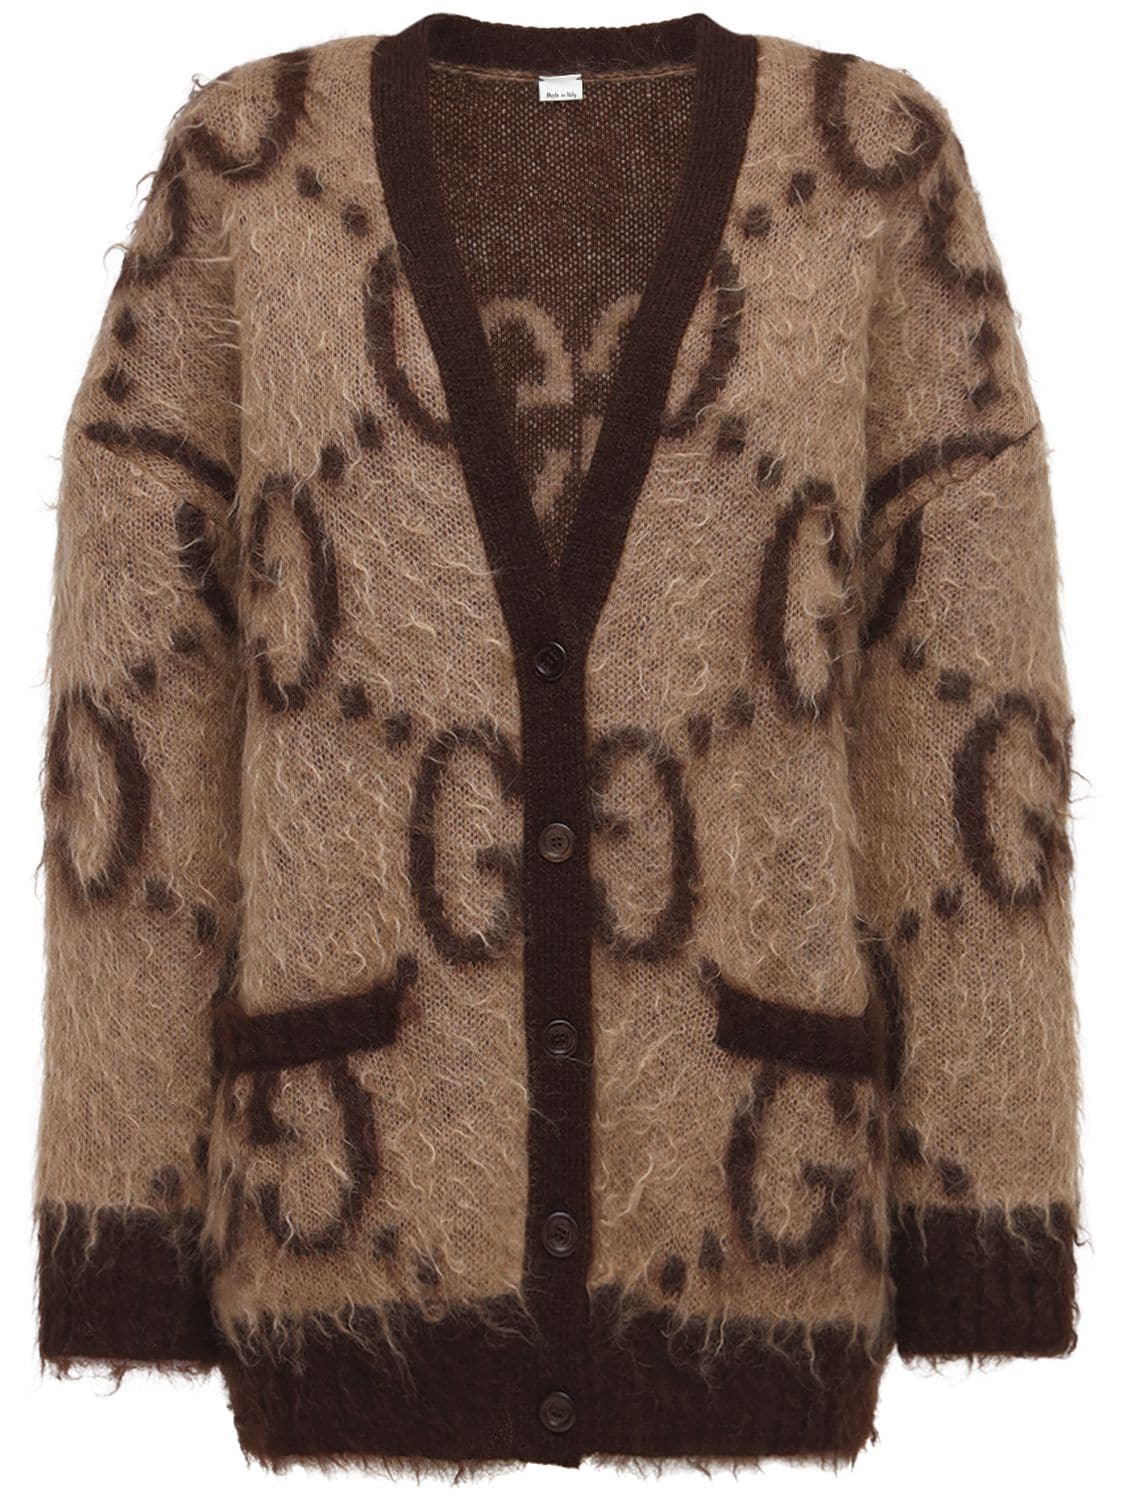 GUCCI Oversized Gg Mohair Blend Knit Cardigan